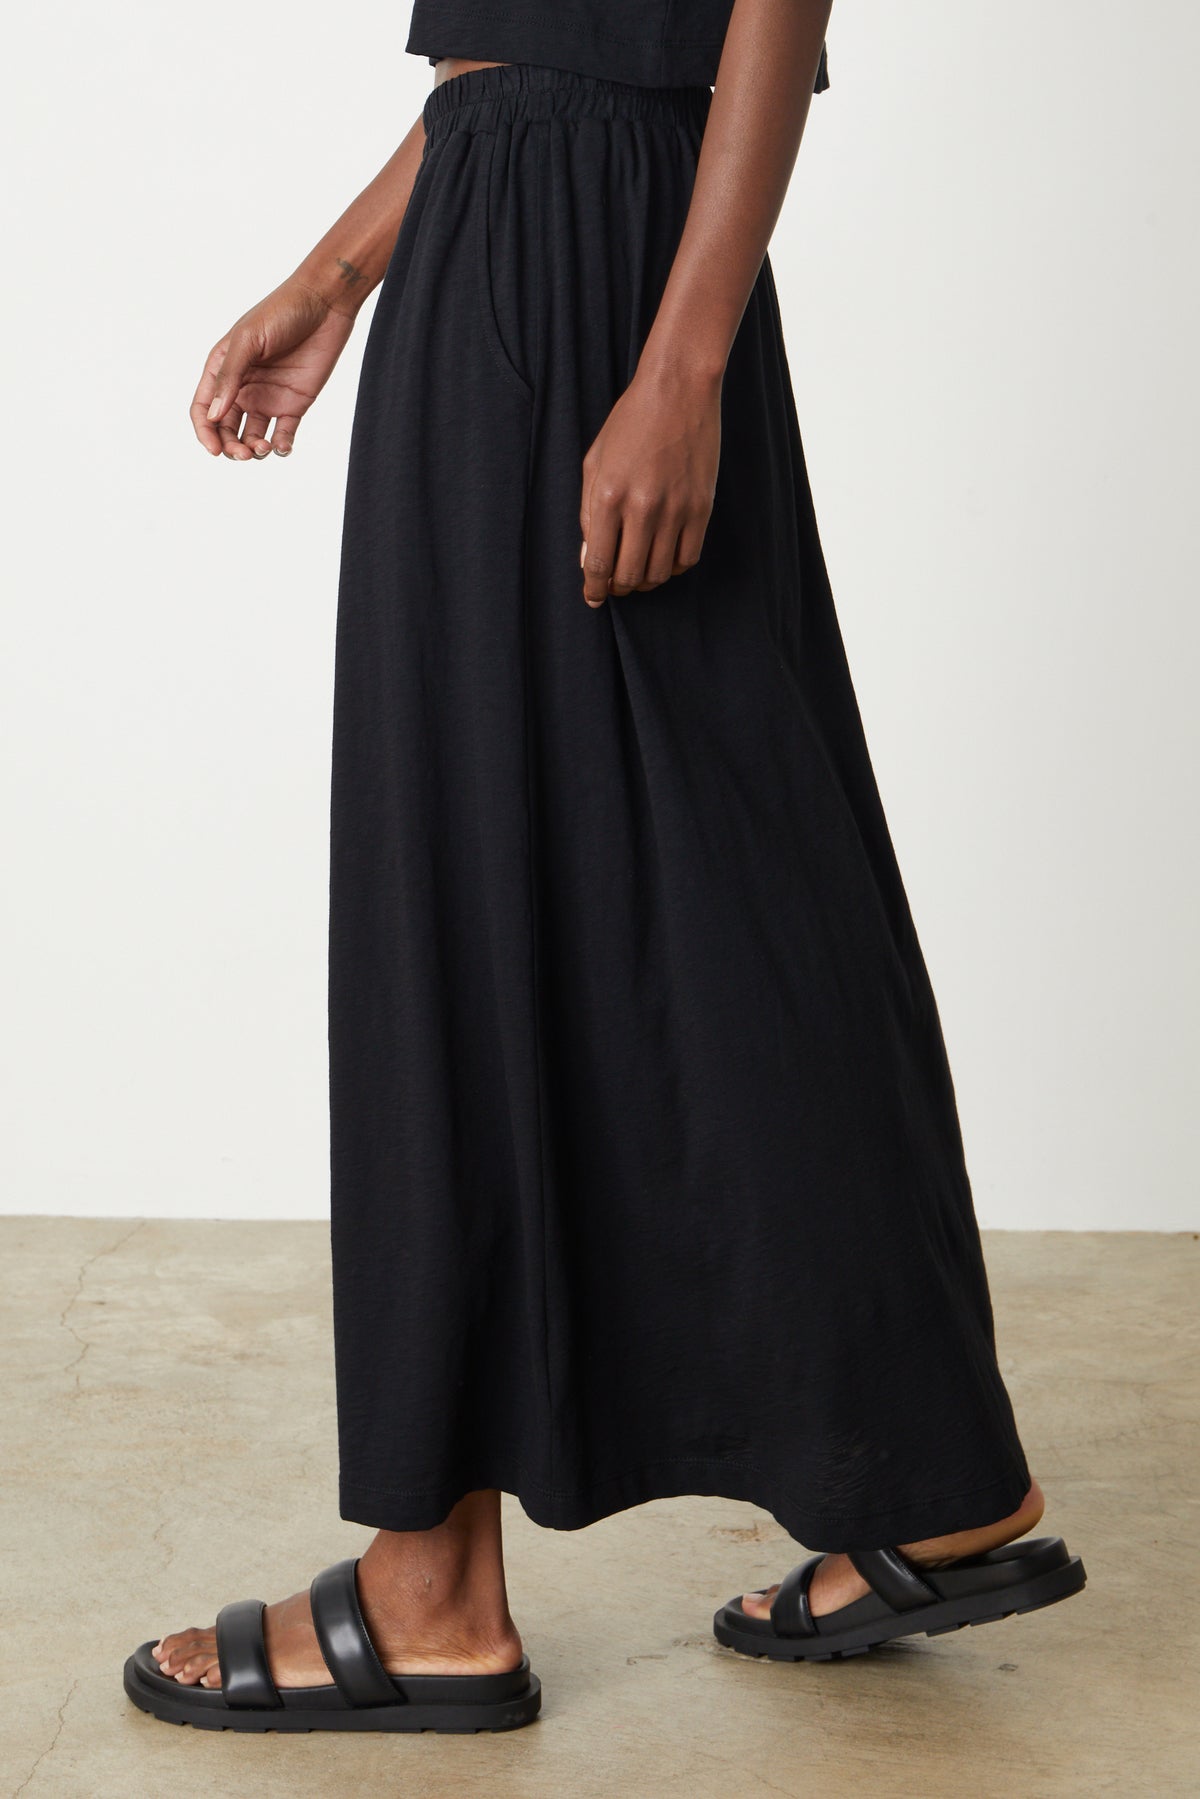 A woman wearing the Velvet by Graham & Spencer GWEN COTTON SLUB MAXI SKIRT and sandals.-26559921488065